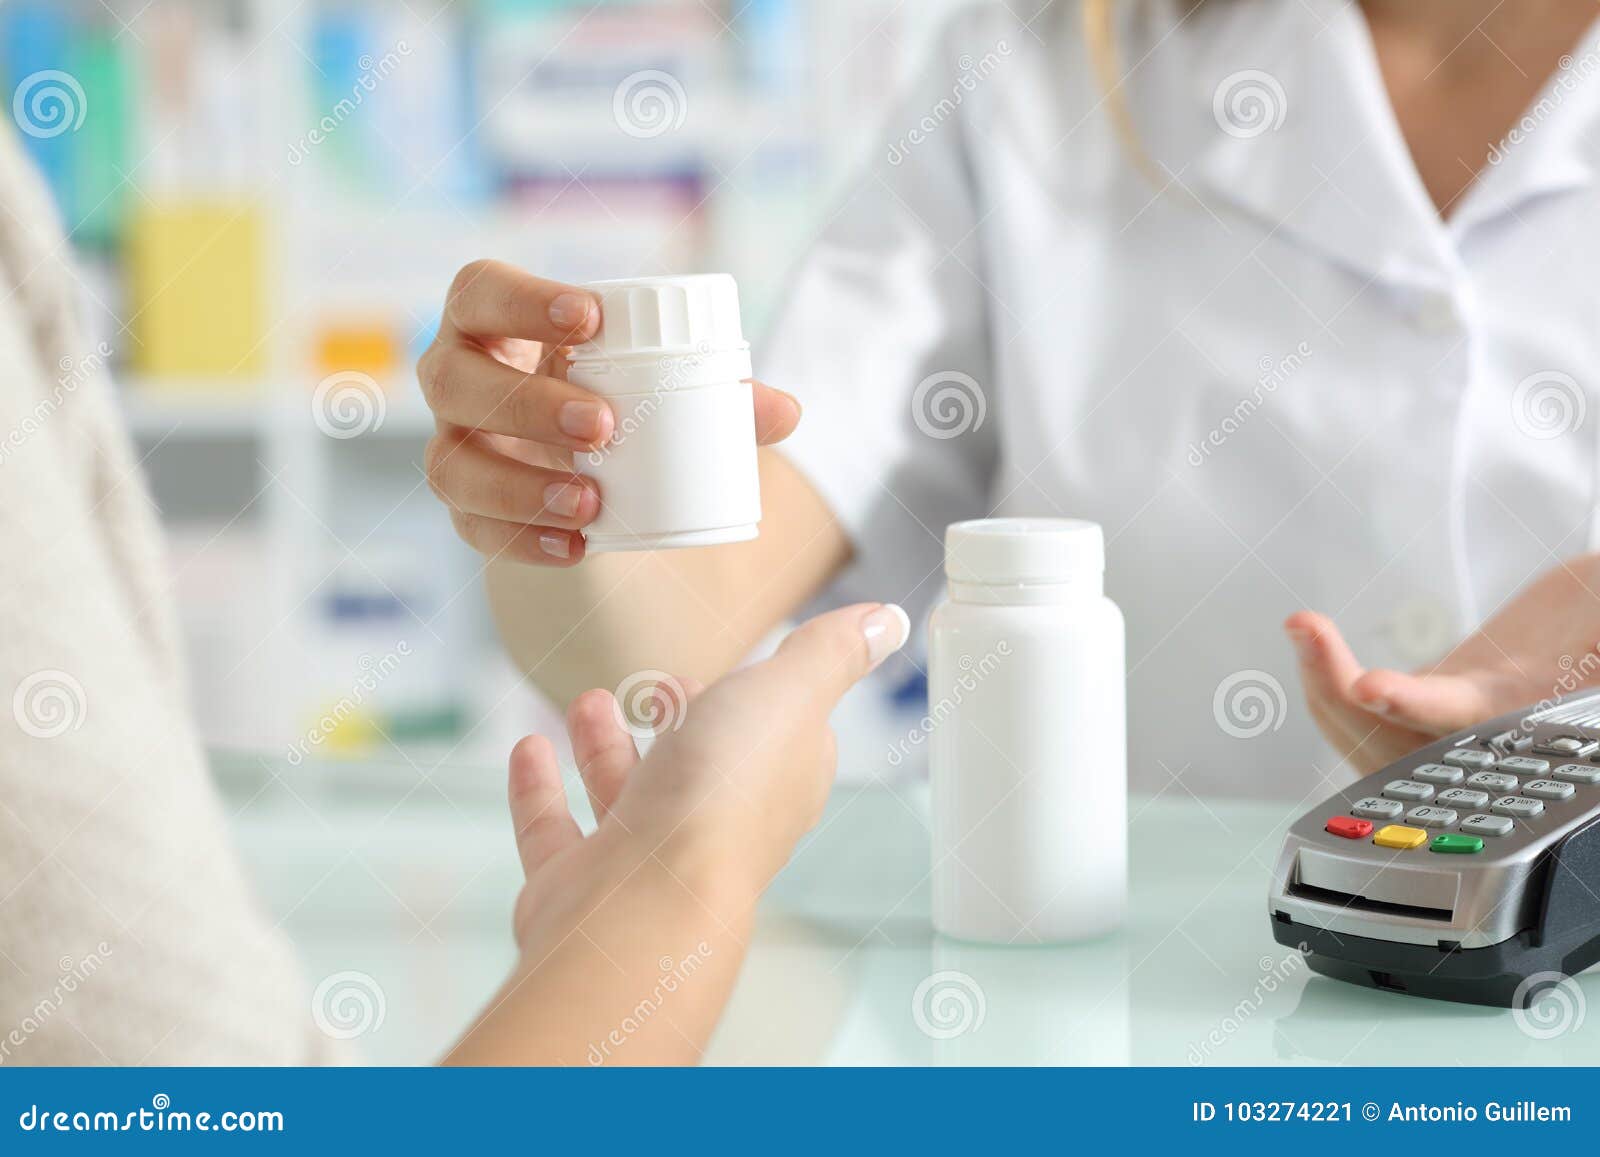 pharmacist selling medicines to a customer